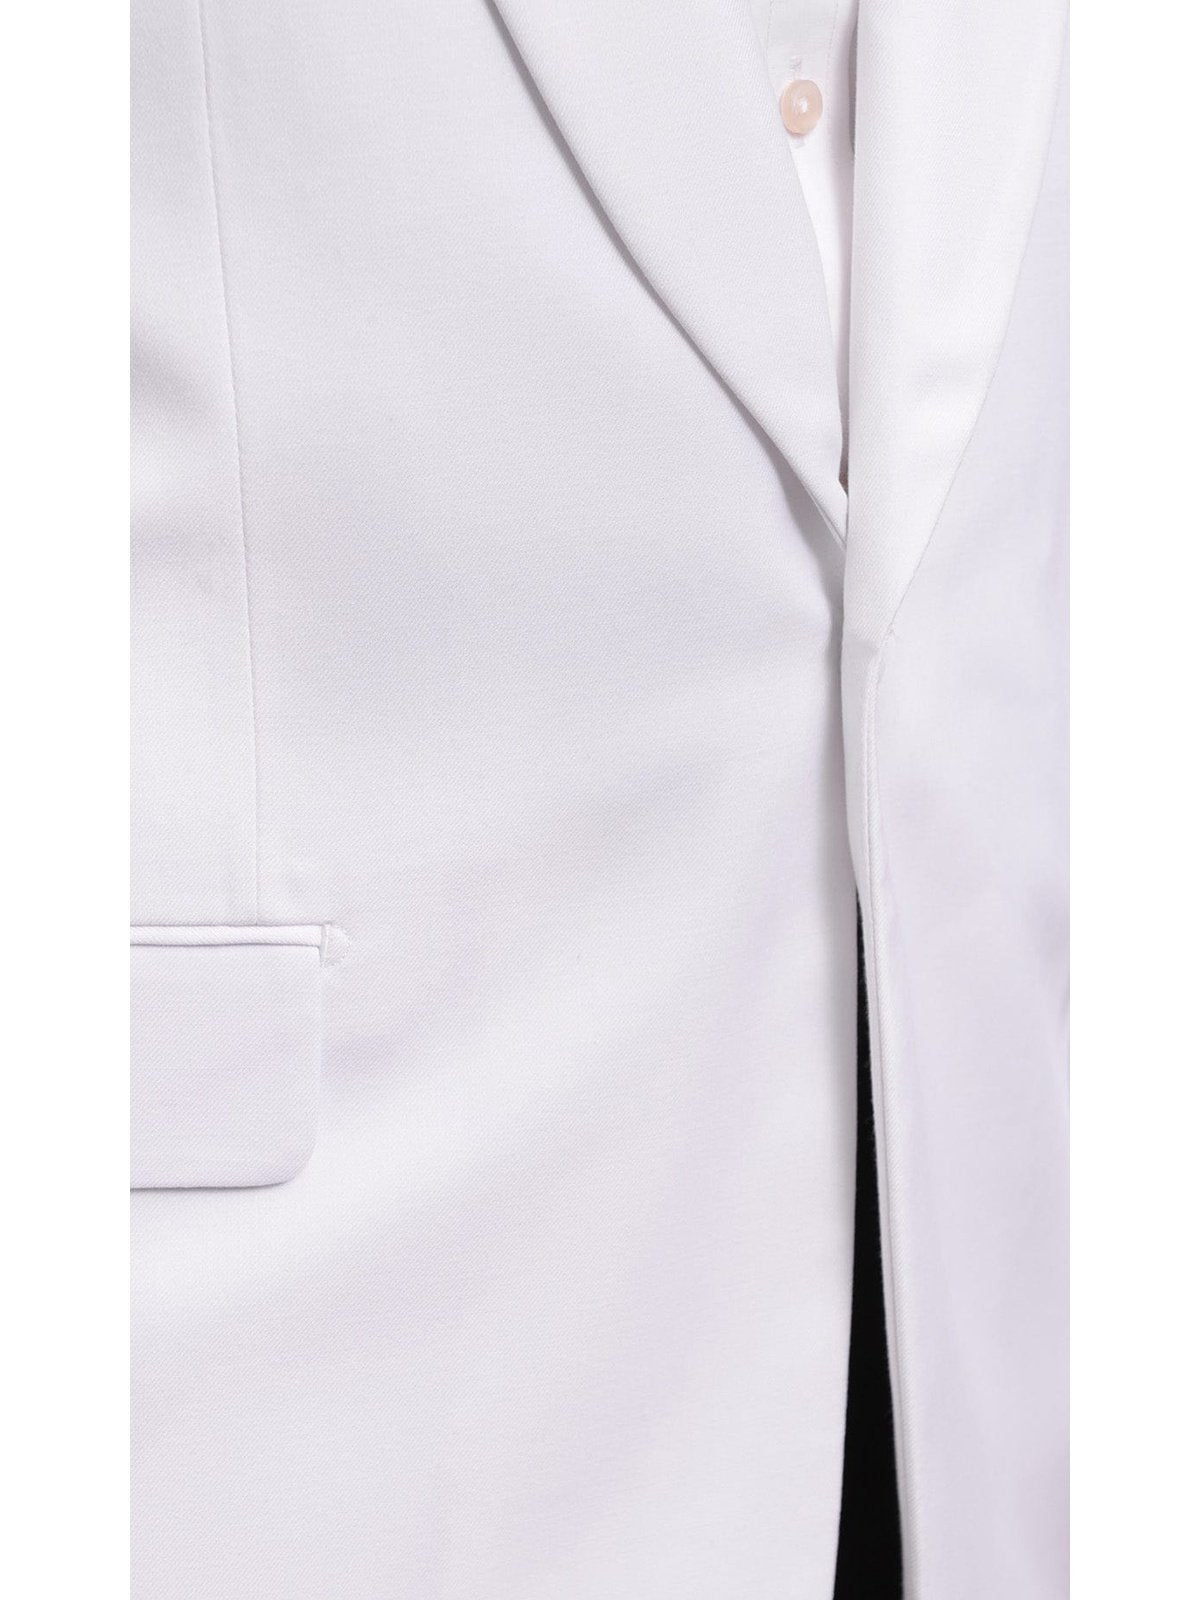 Mens Giorgio Forelli Classic Fit Solid White 1 Button Dinner Jacket ...